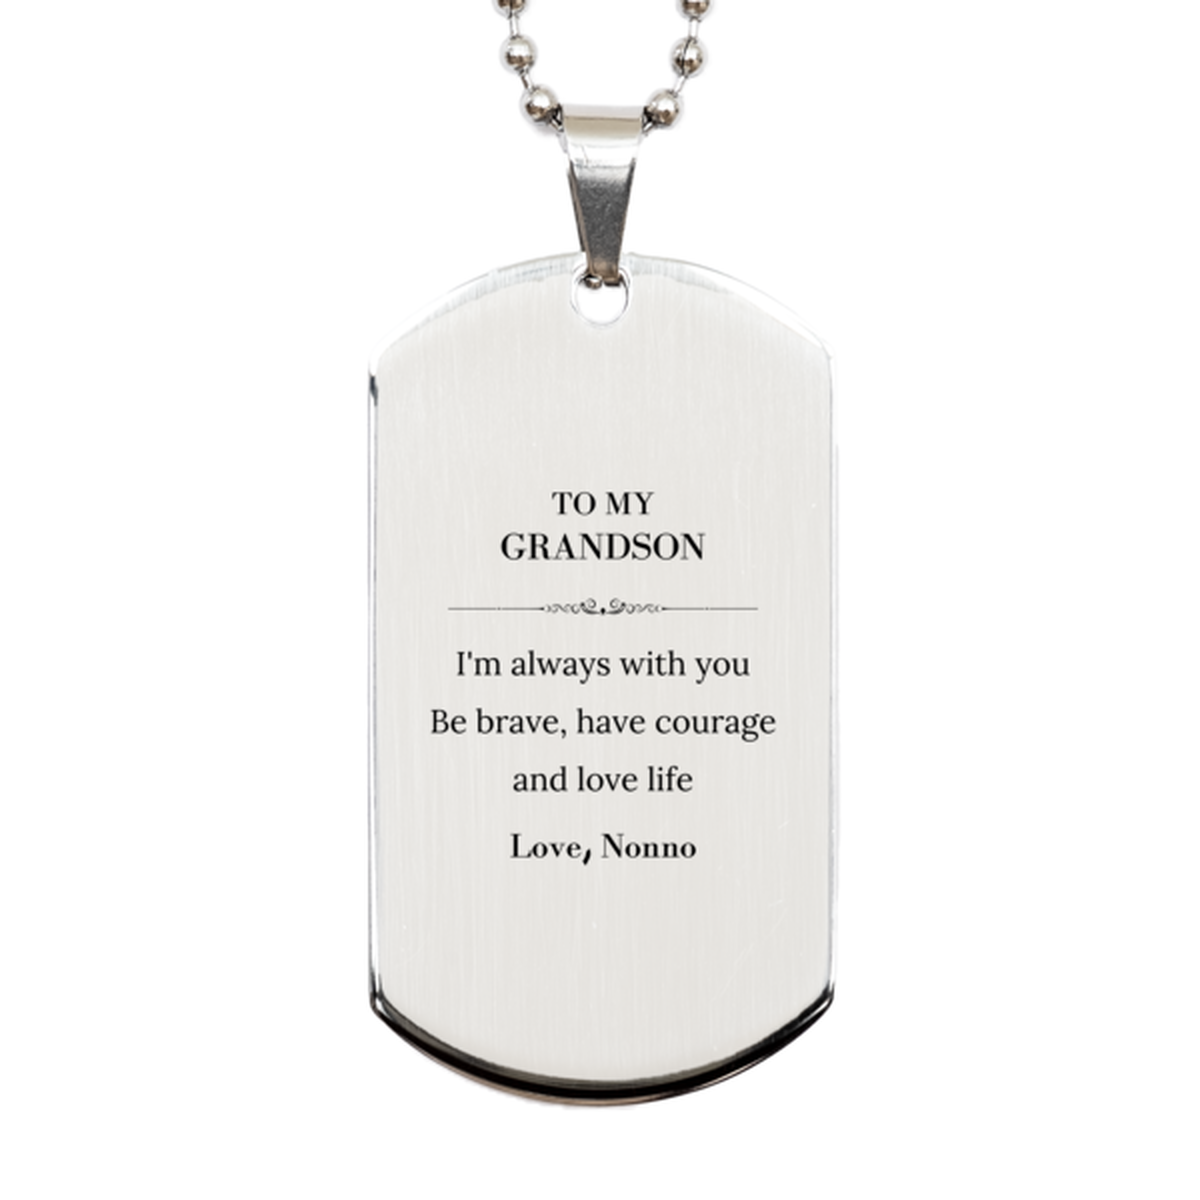 To My Grandson Gifts from Nonno, Unique Silver Dog Tag Inspirational Christmas Birthday Graduation Gifts for Grandson I'm always with you. Be brave, have courage and love life. Love, Nonno